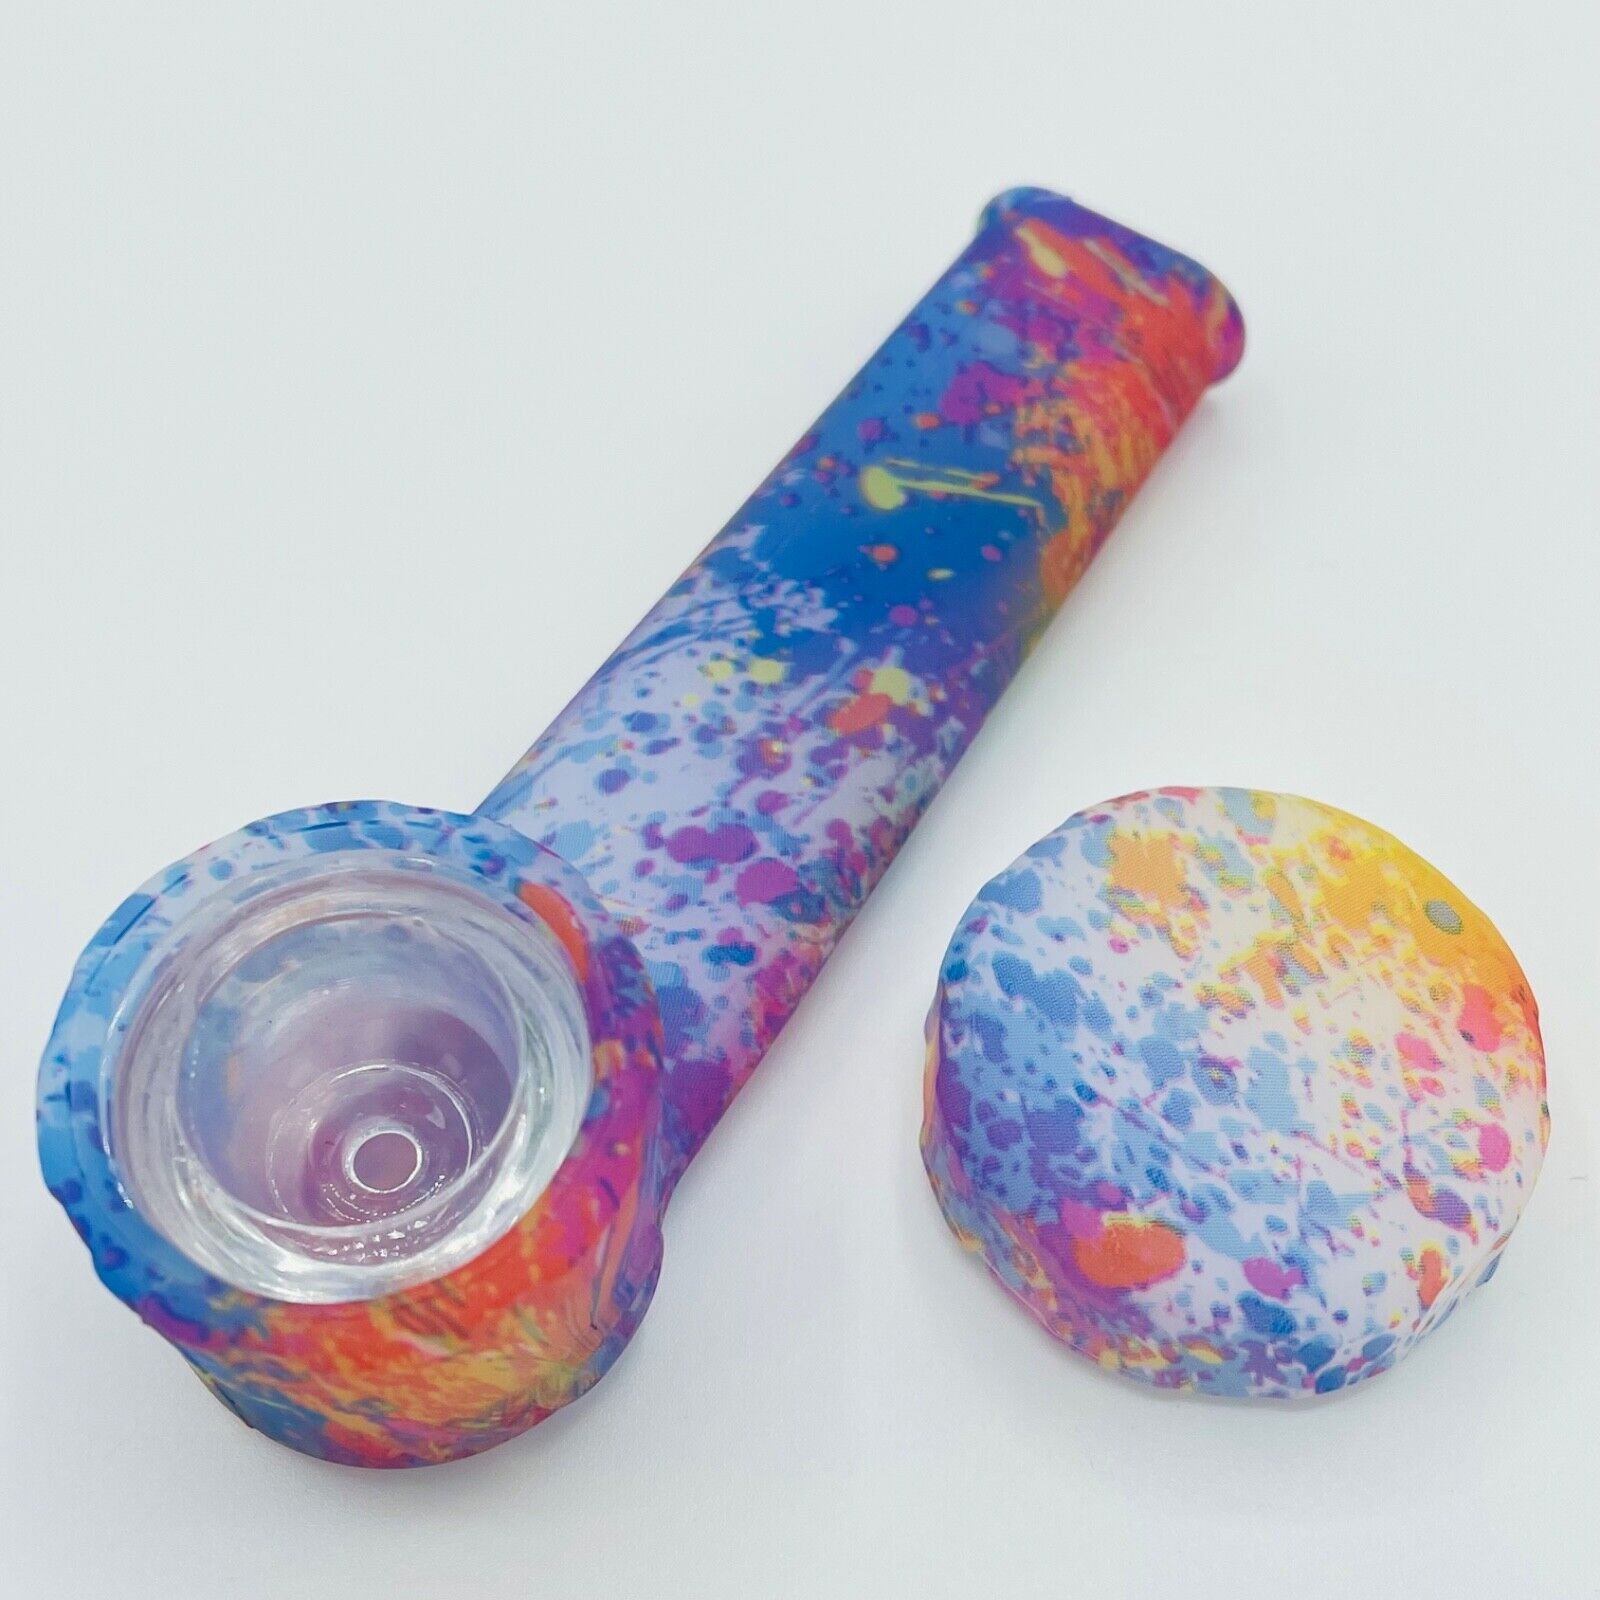 Silicone Smoking Pipe with Glass Bowl & Cap Lid | Glow-n-dark color splatter